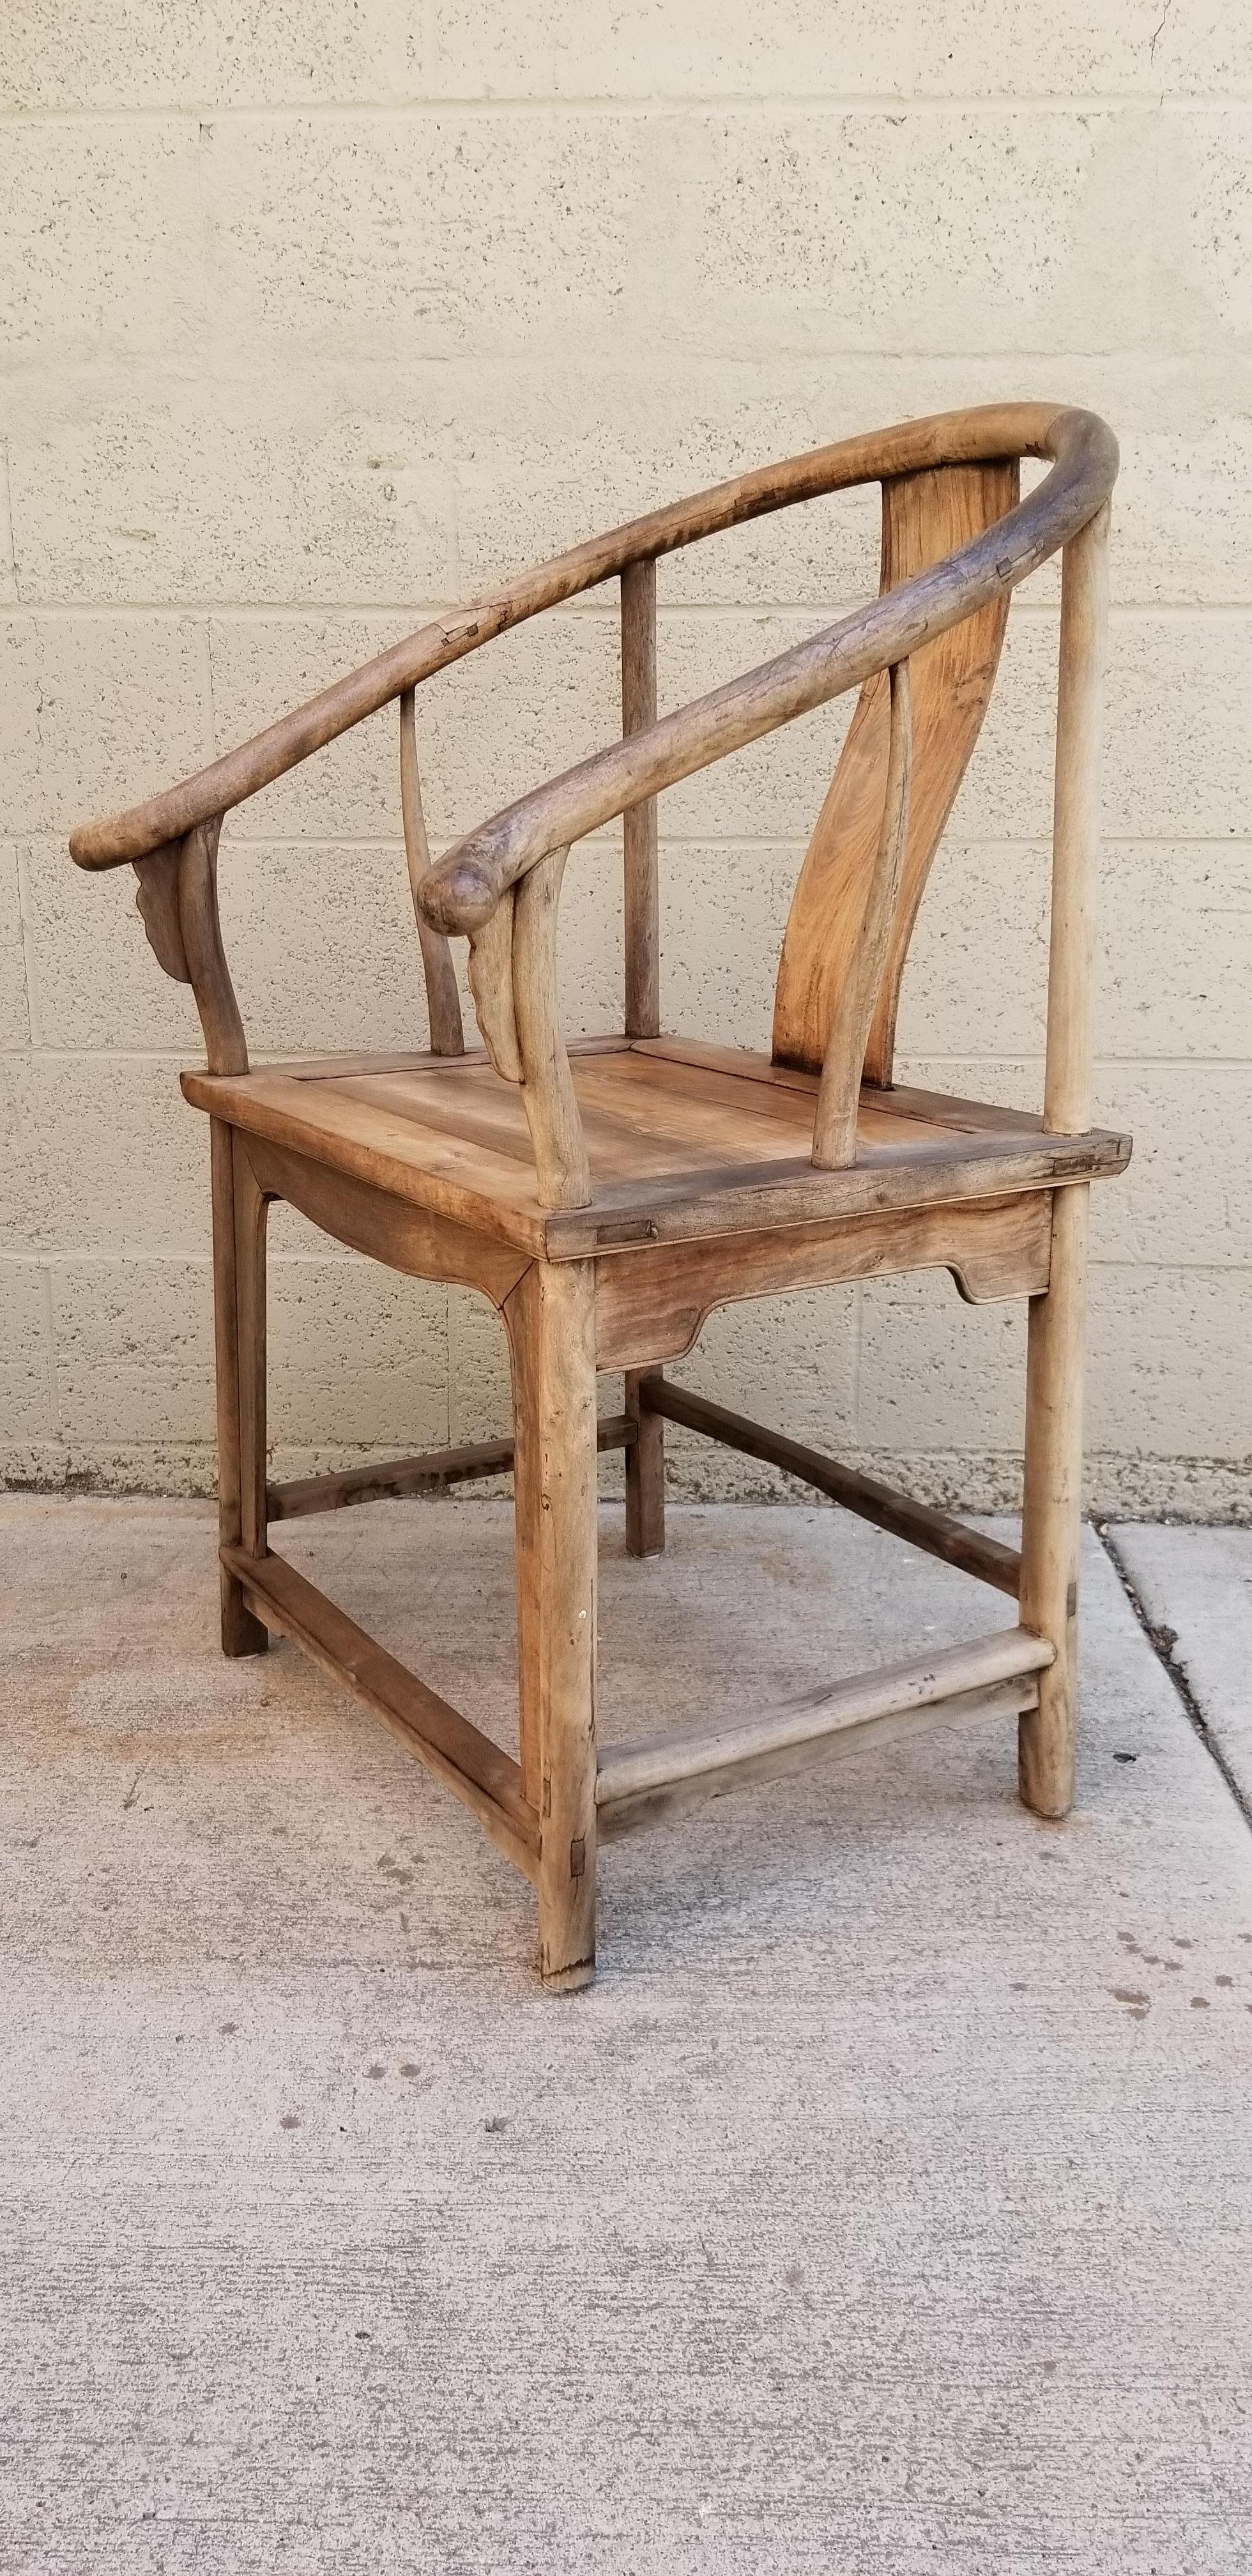 A late 1800s Chinese horseshoe chair made of a hardwood that appears to be walnut or teak. Old-World weathered finish give this chair wonderful, unique character. Plank seat, intricate joinery, graceful arms.